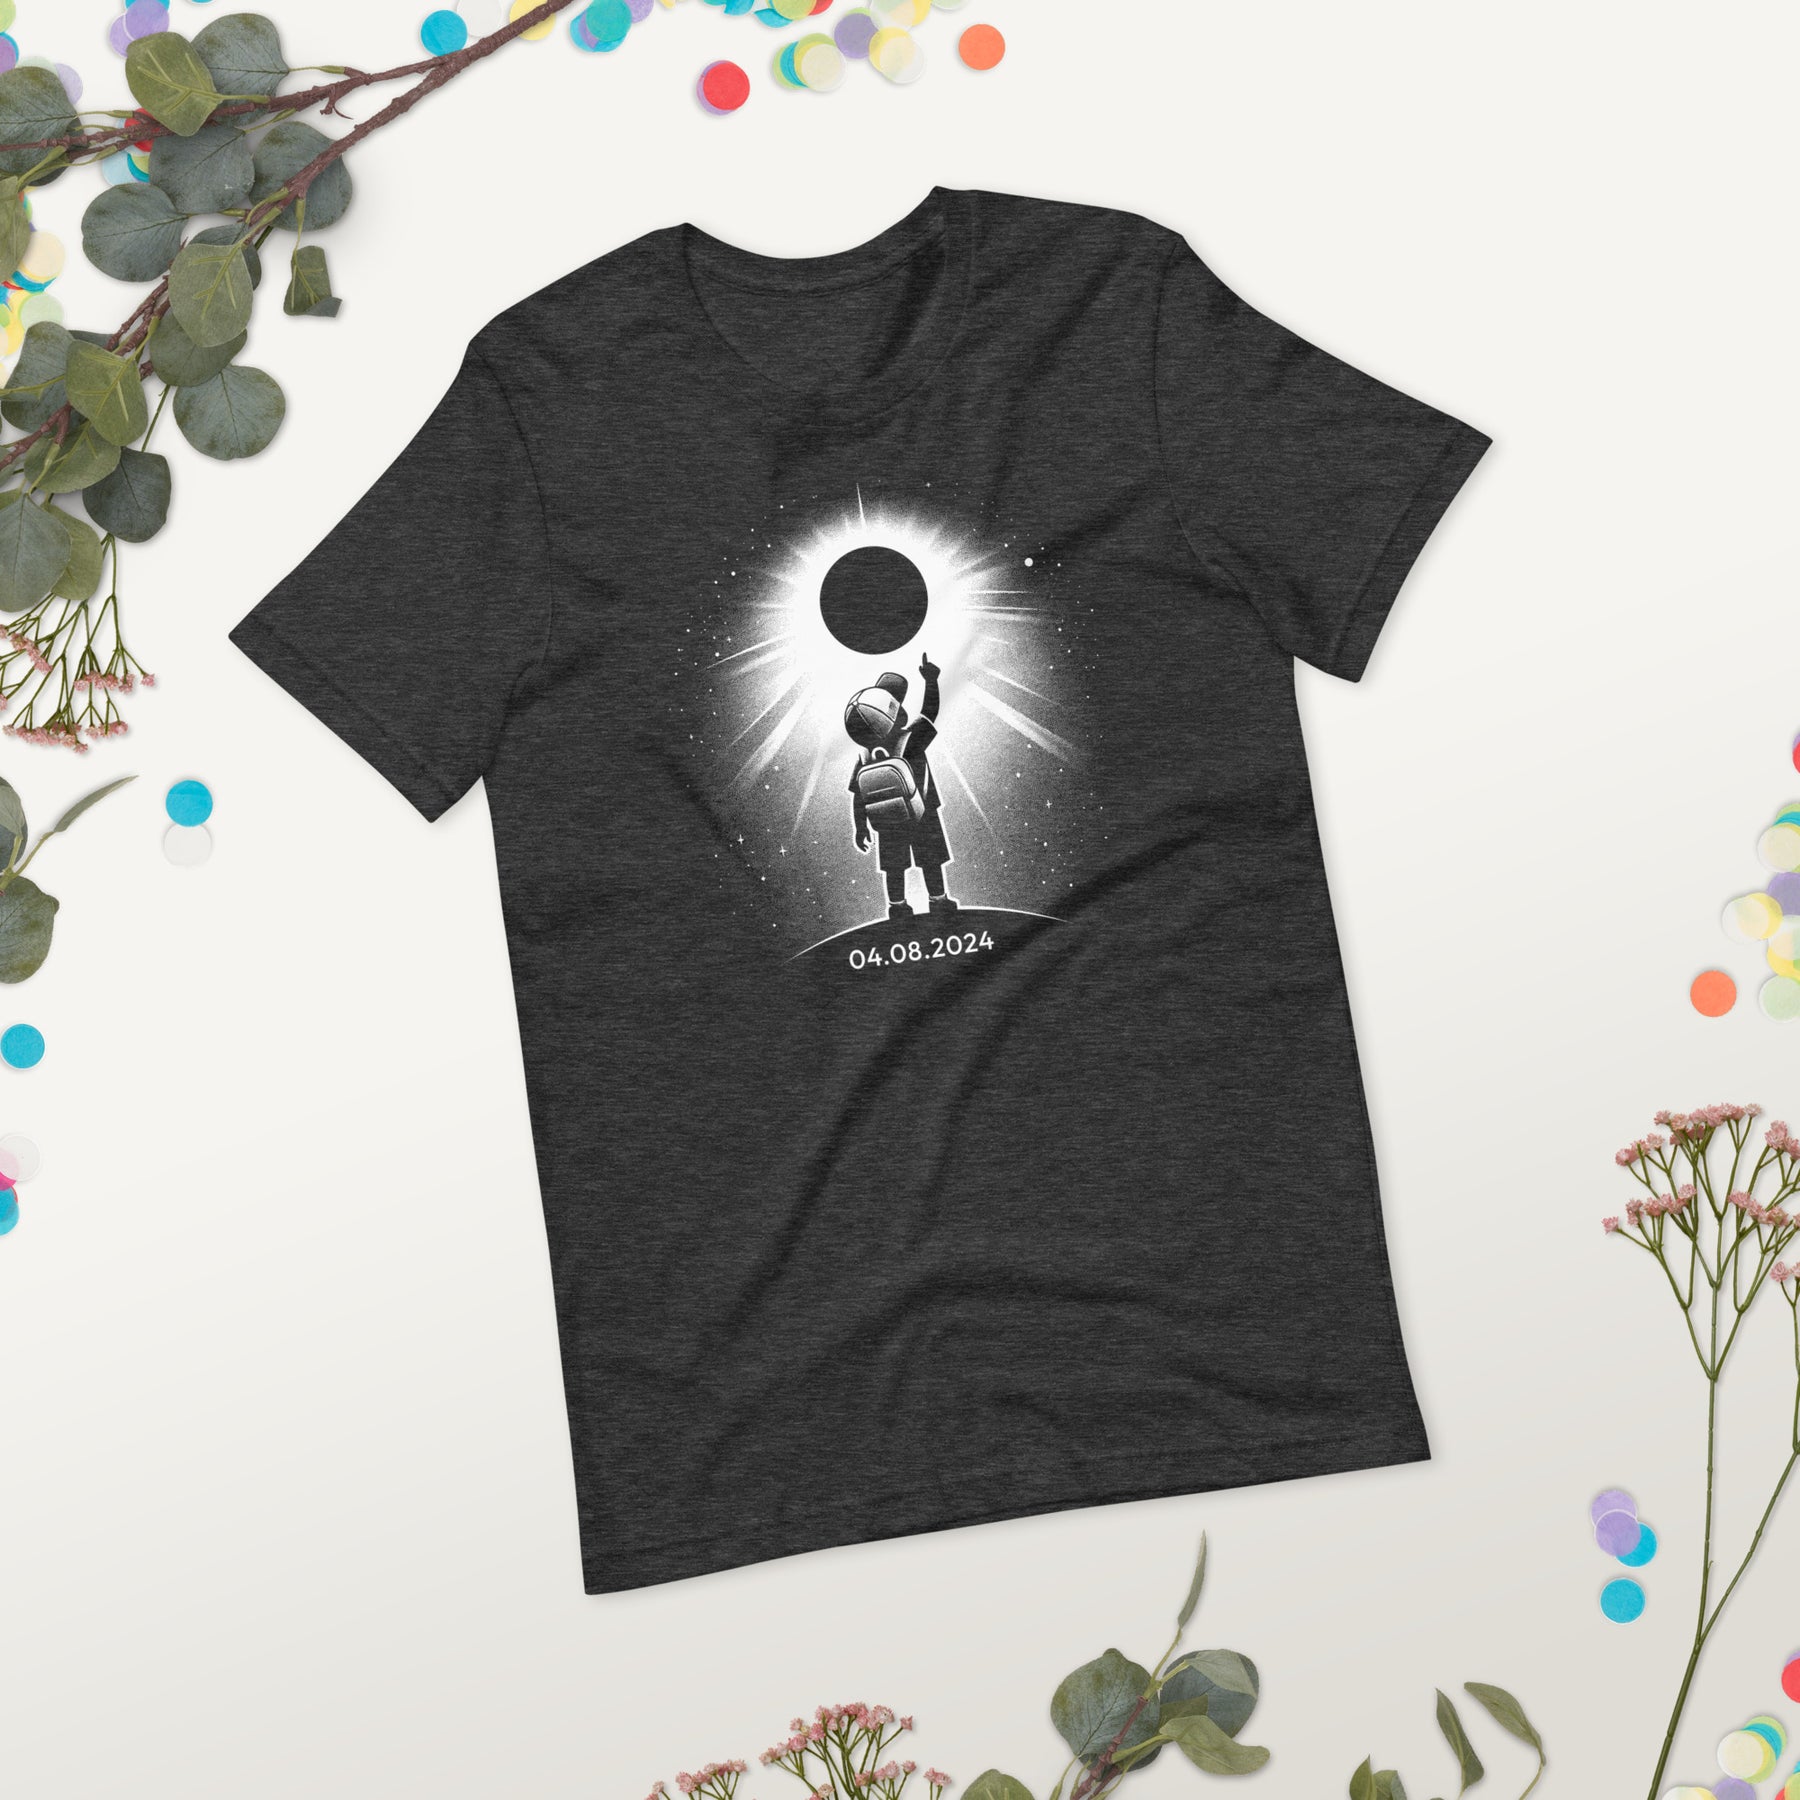 Total Solar Eclipse 2024 Shirt, Child Under Moon Design, Family Matching Tee for Spring Astronomy Events, Memorable Eclipse Souvenir Gift, Path of Totality